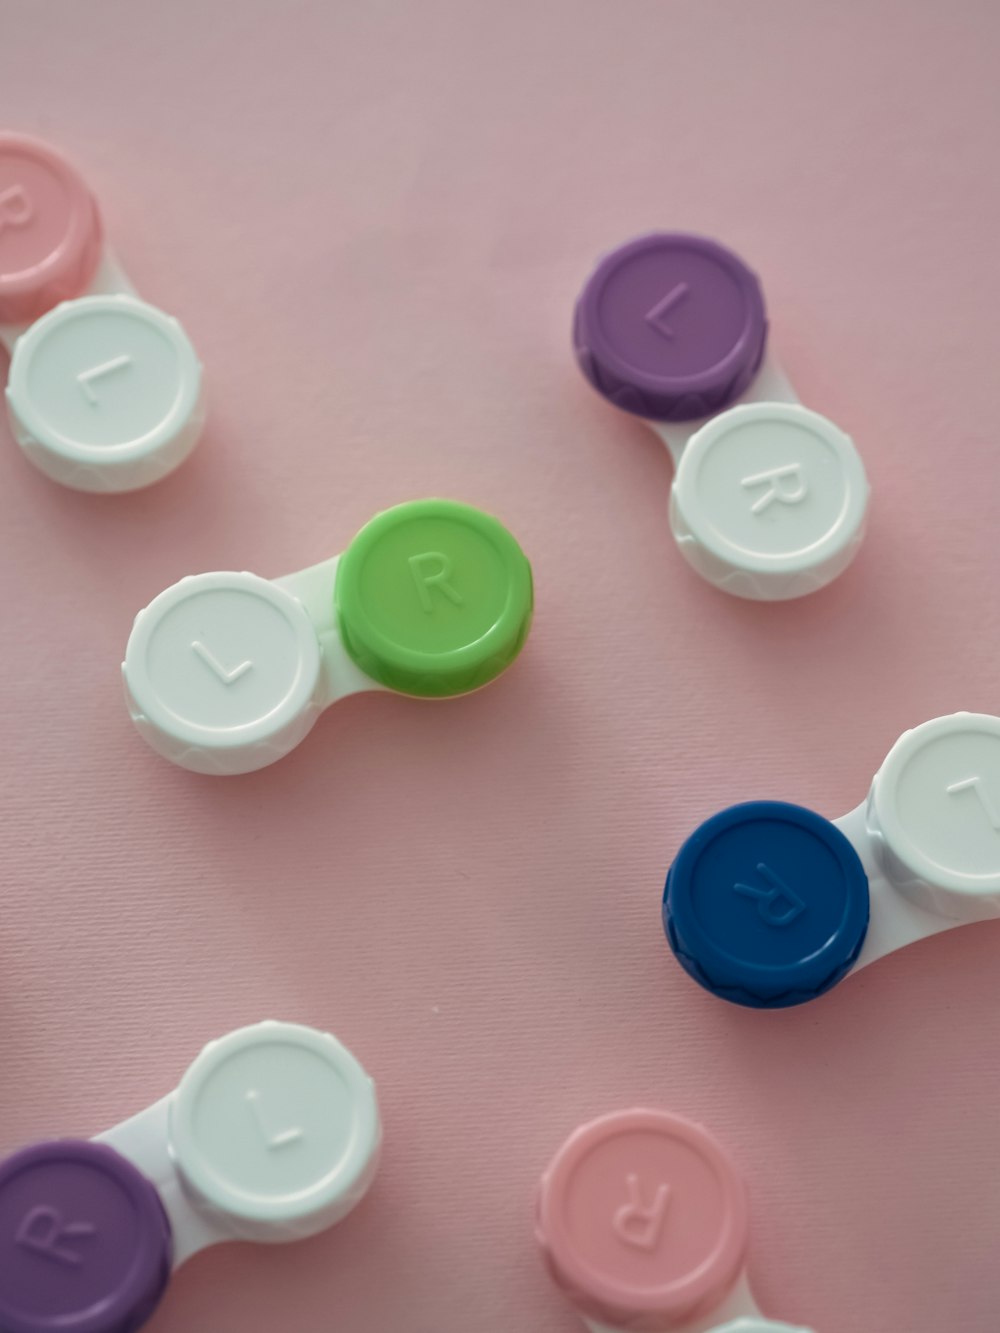 a group of different colored buttons on a pink surface